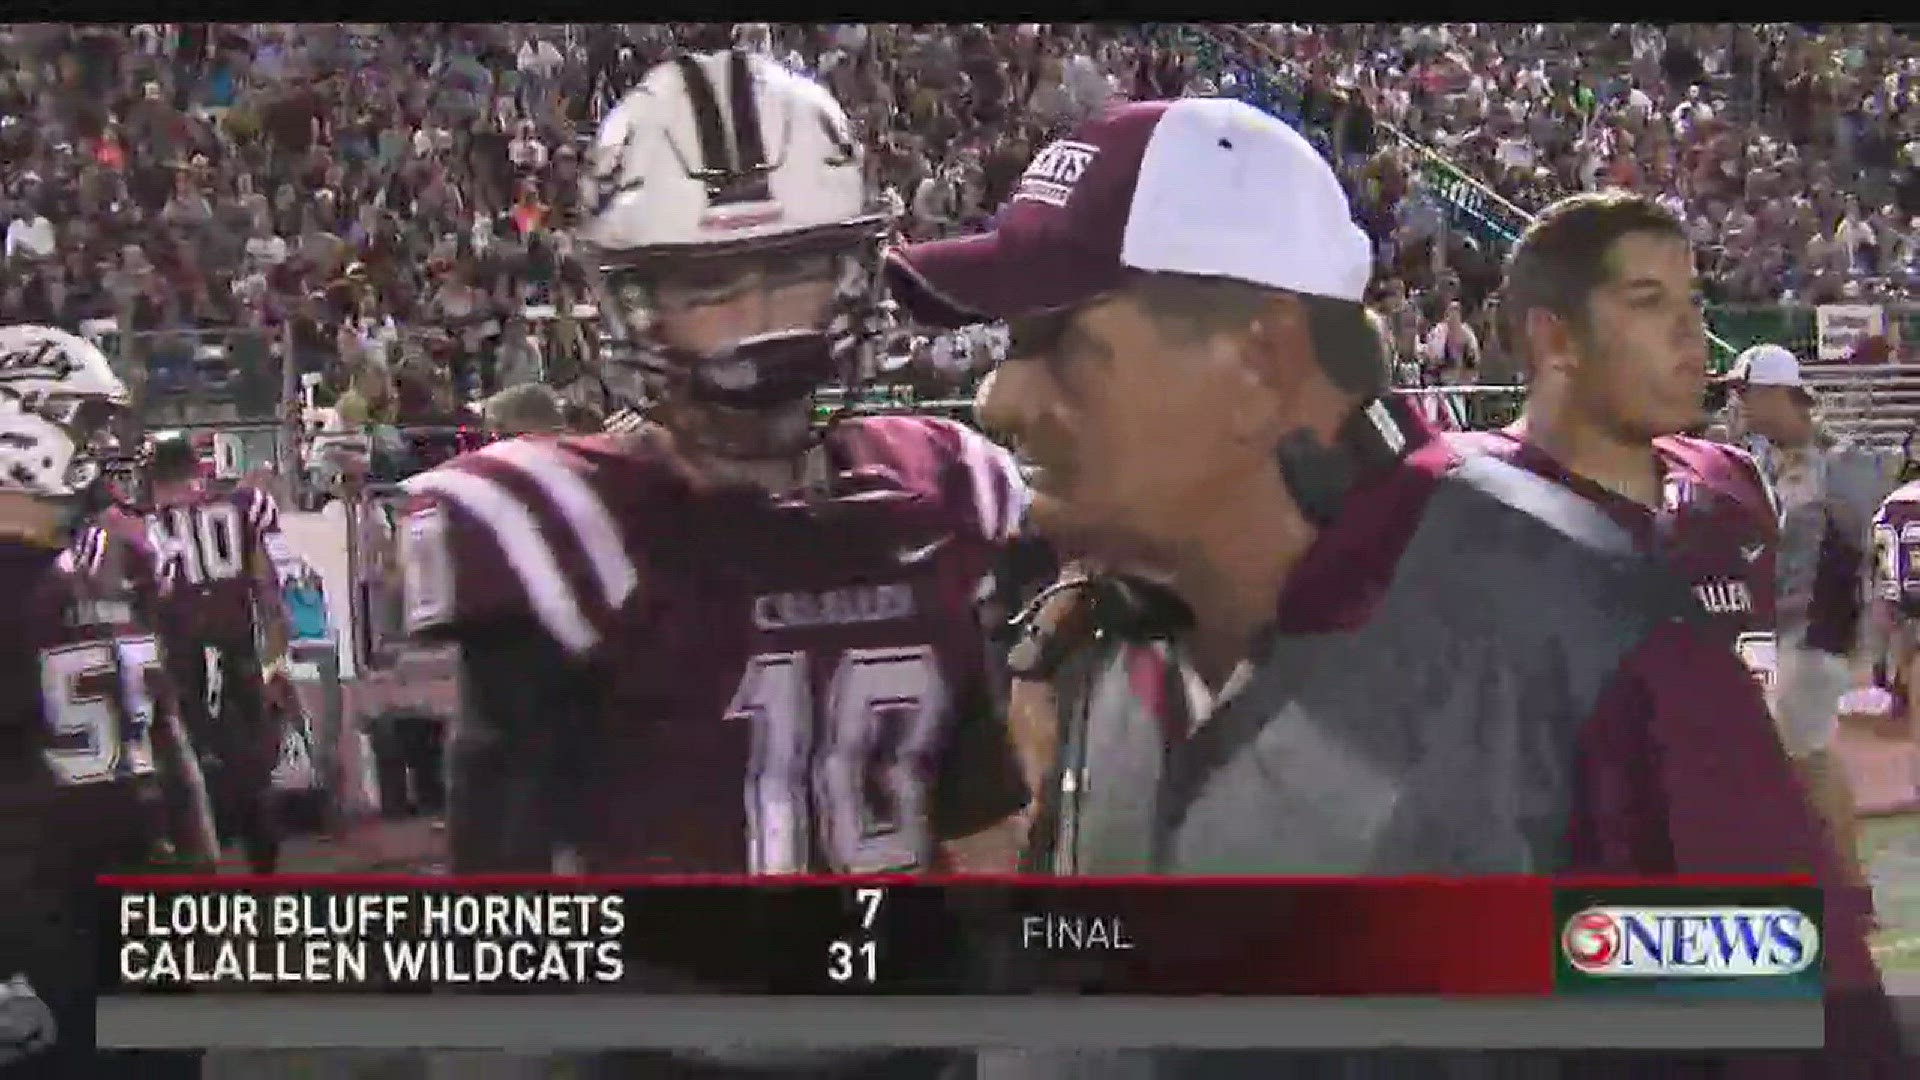 So with the win, Phil Danaher is now in sole possession of Texas's all-tine wins record, passing GA Moore.Ian Steele caught up with the new record holder after the district championship win over Flour Bluff.